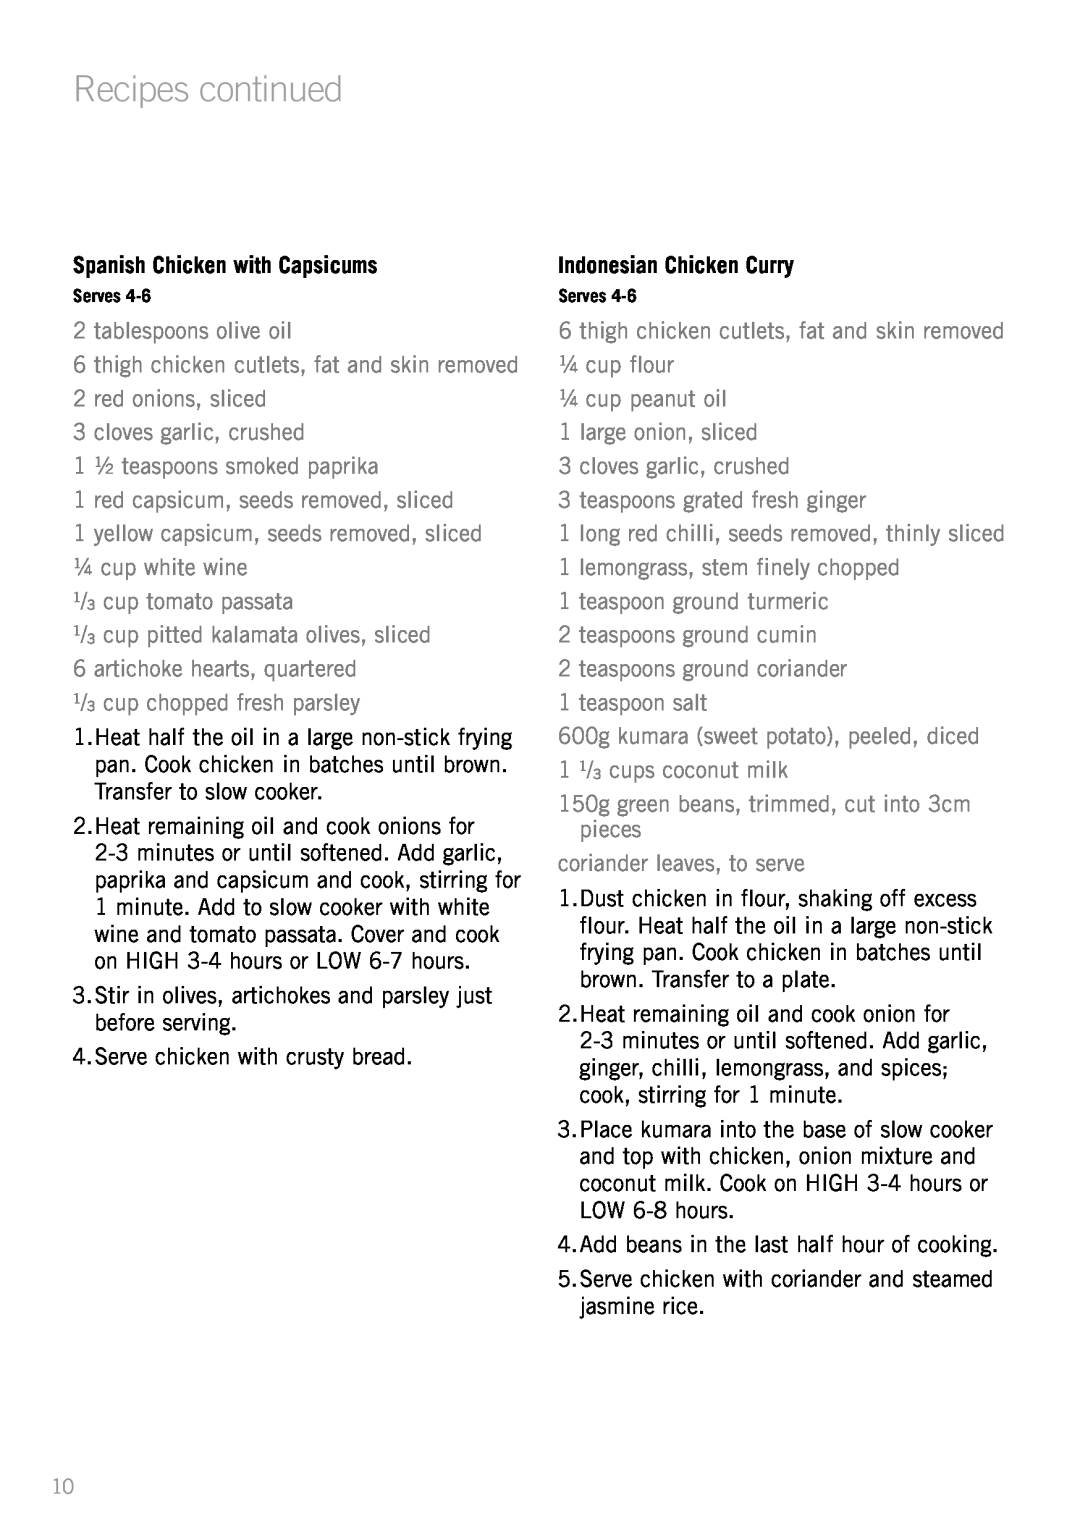 Sunbeam HP5590 manual Spanish Chicken with Capsicums, Indonesian Chicken Curry, Recipes continued 